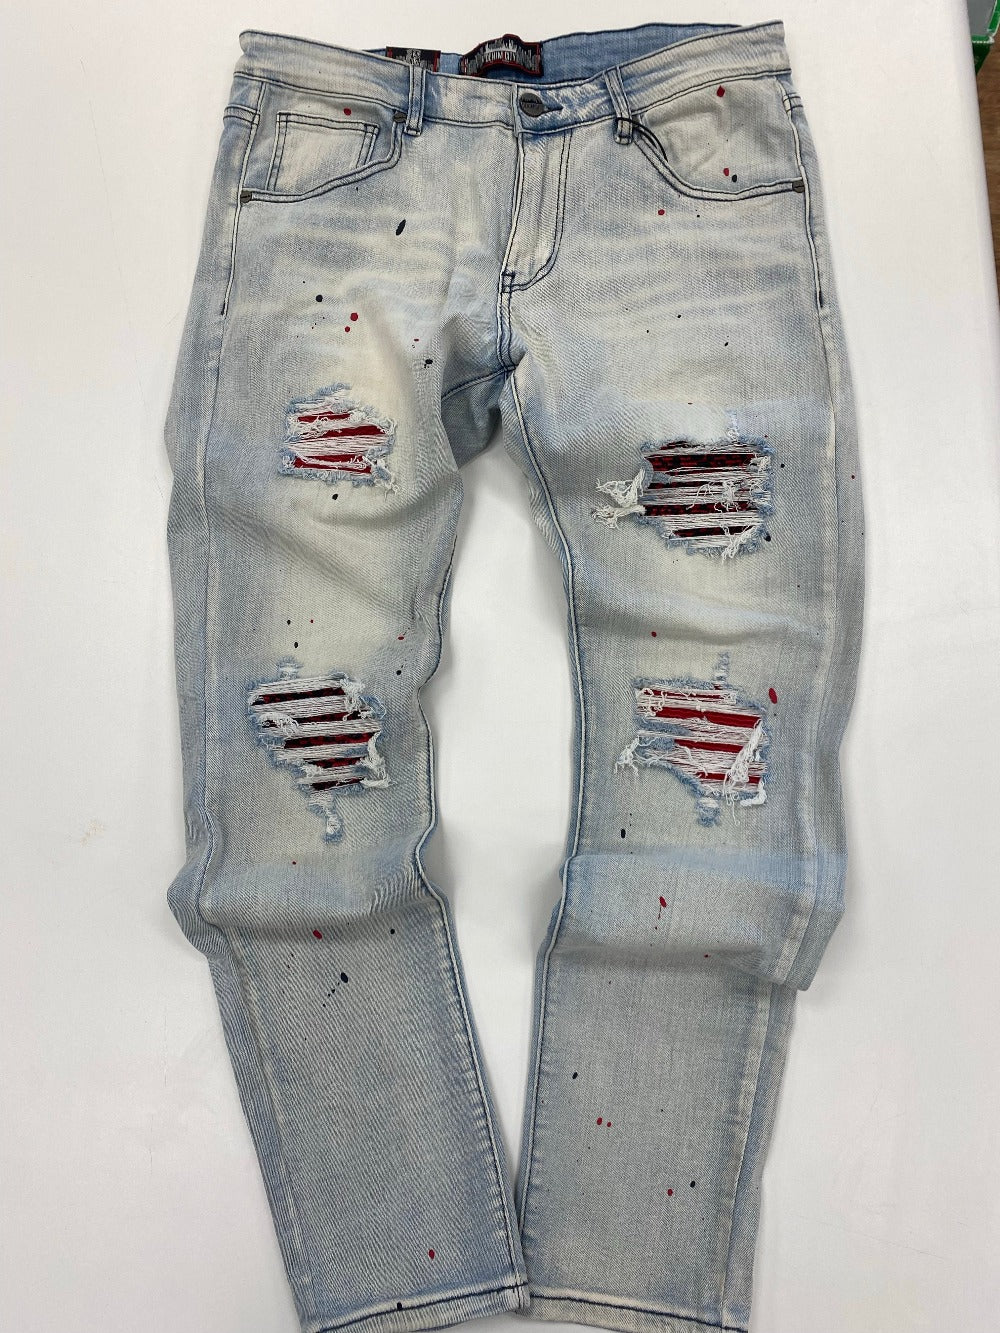 Denimicity light blue Jean with Red Patches